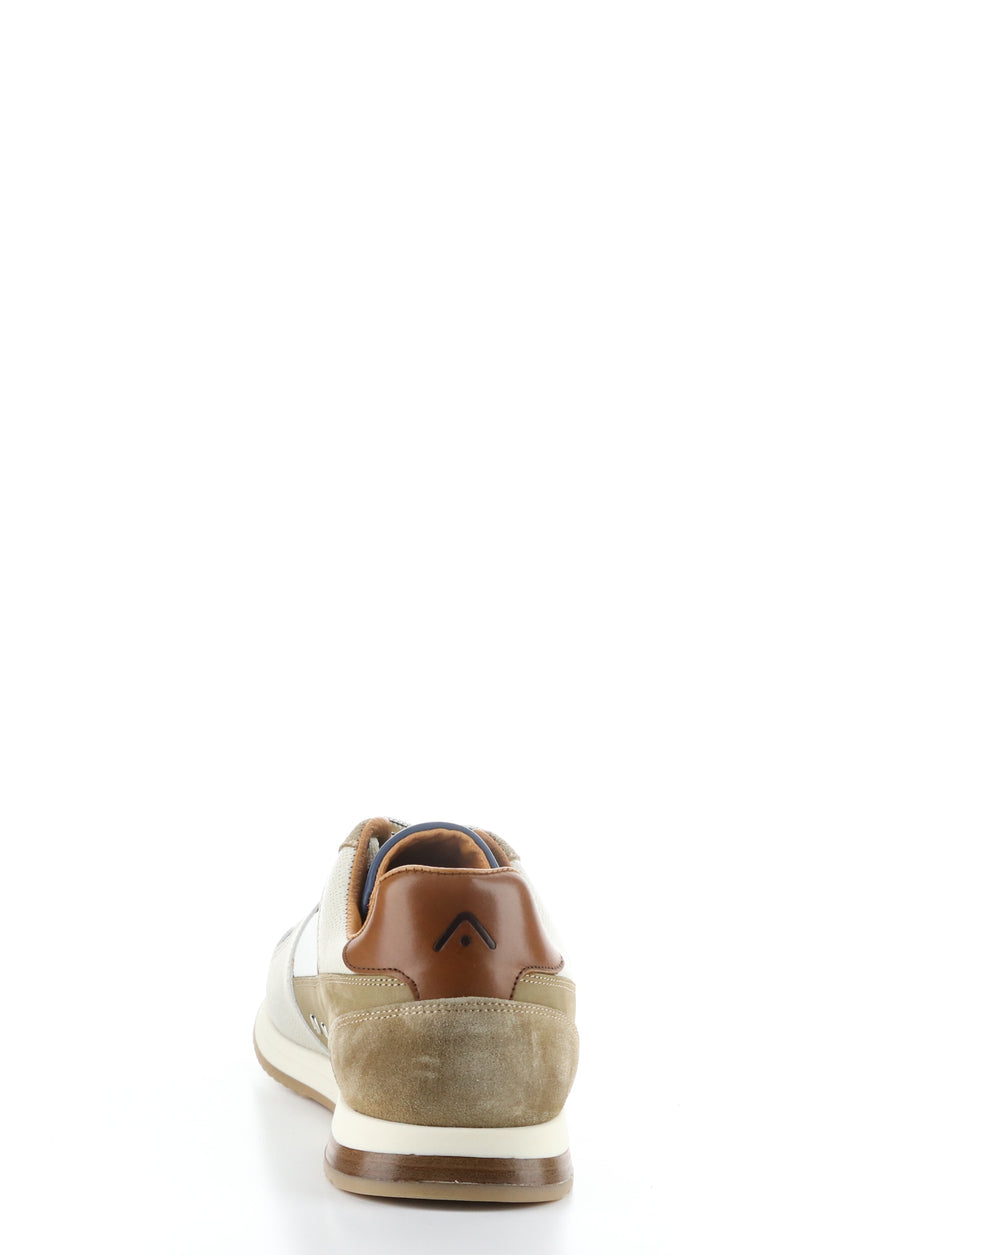 11240 GREY/OFF WHITE/CAMEL Lace-up Shoes